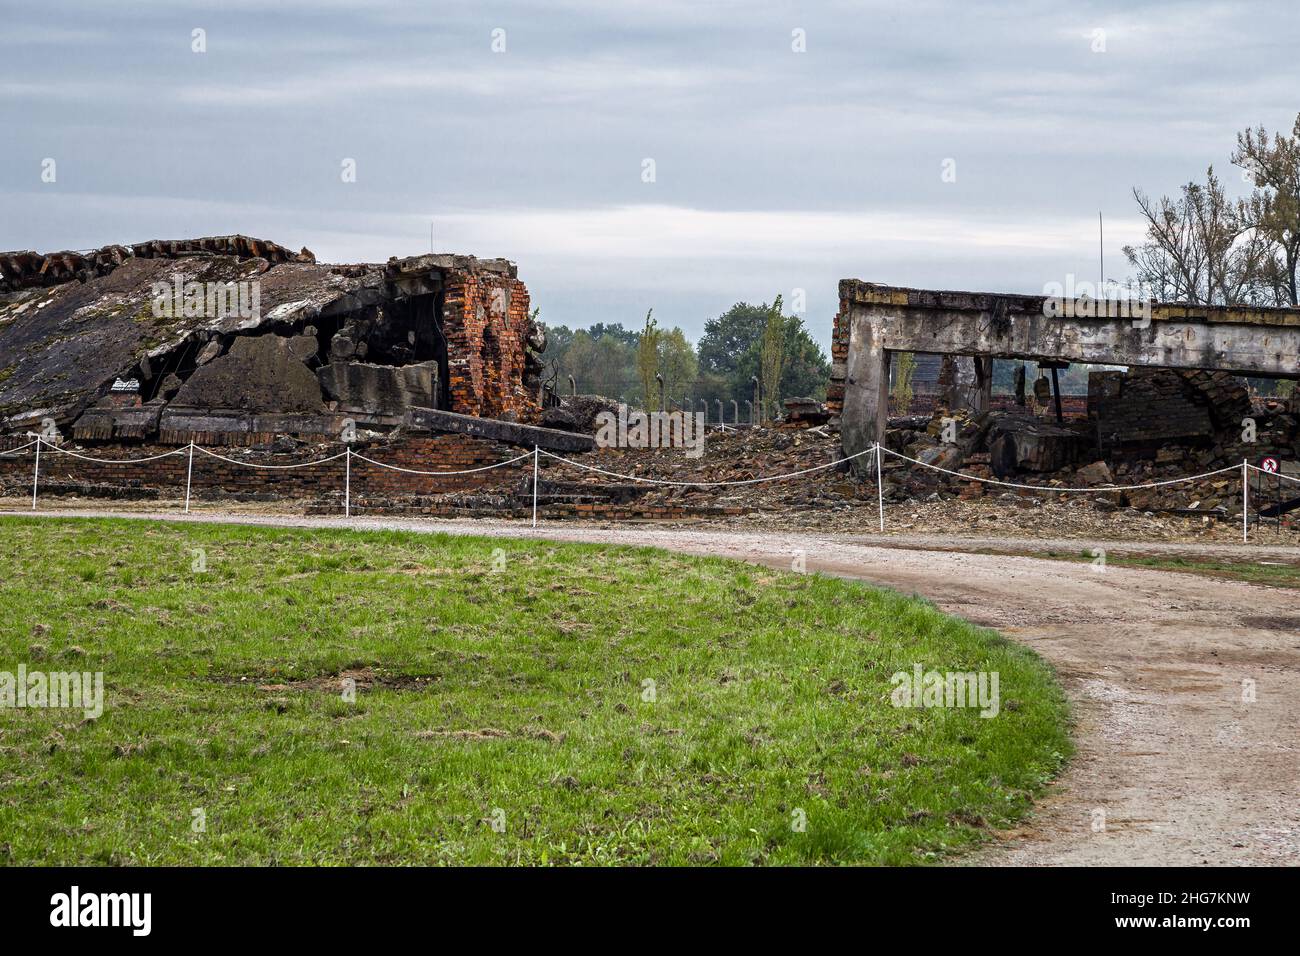 Destroyed execution gas chamber, Auschwitz Birkenau Concentration Camp Stock Photo